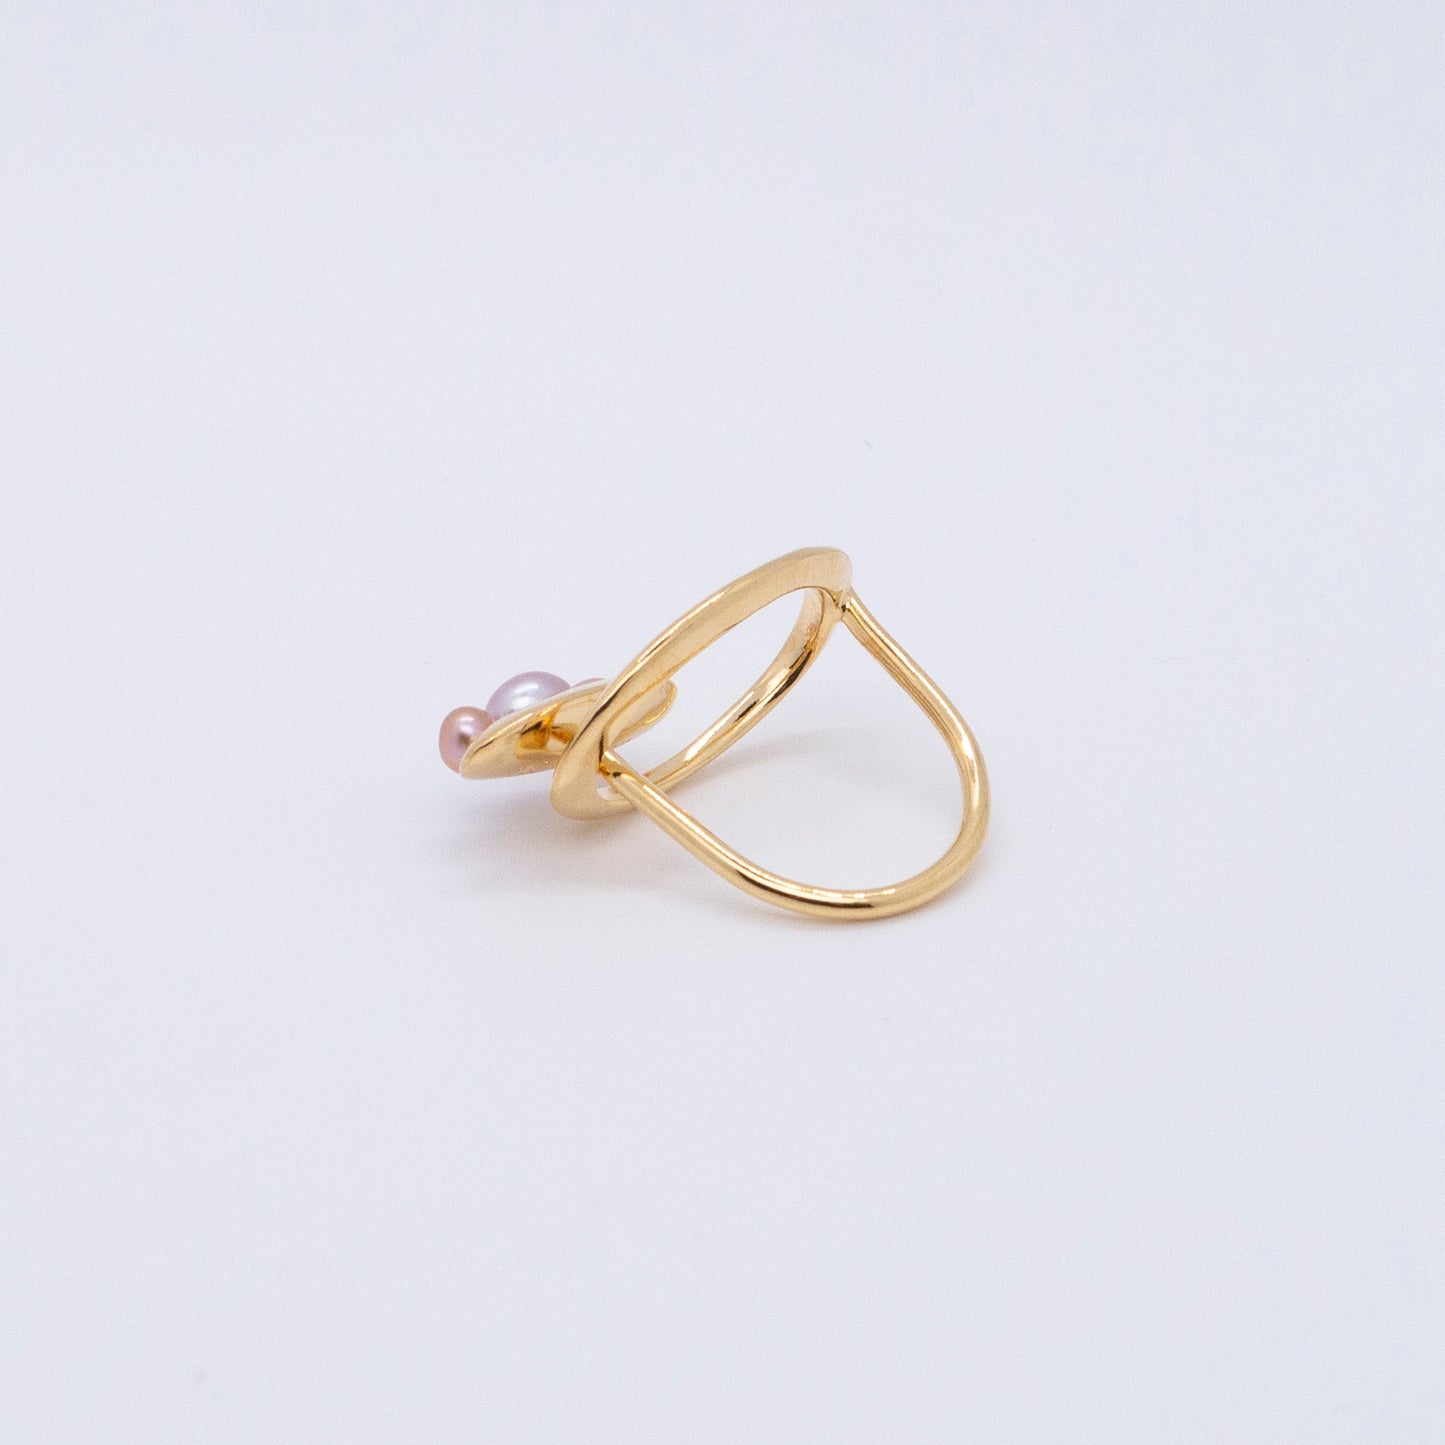 Multiverse - Time Travel Baby Pearl Ring (18K Gold Plated) 